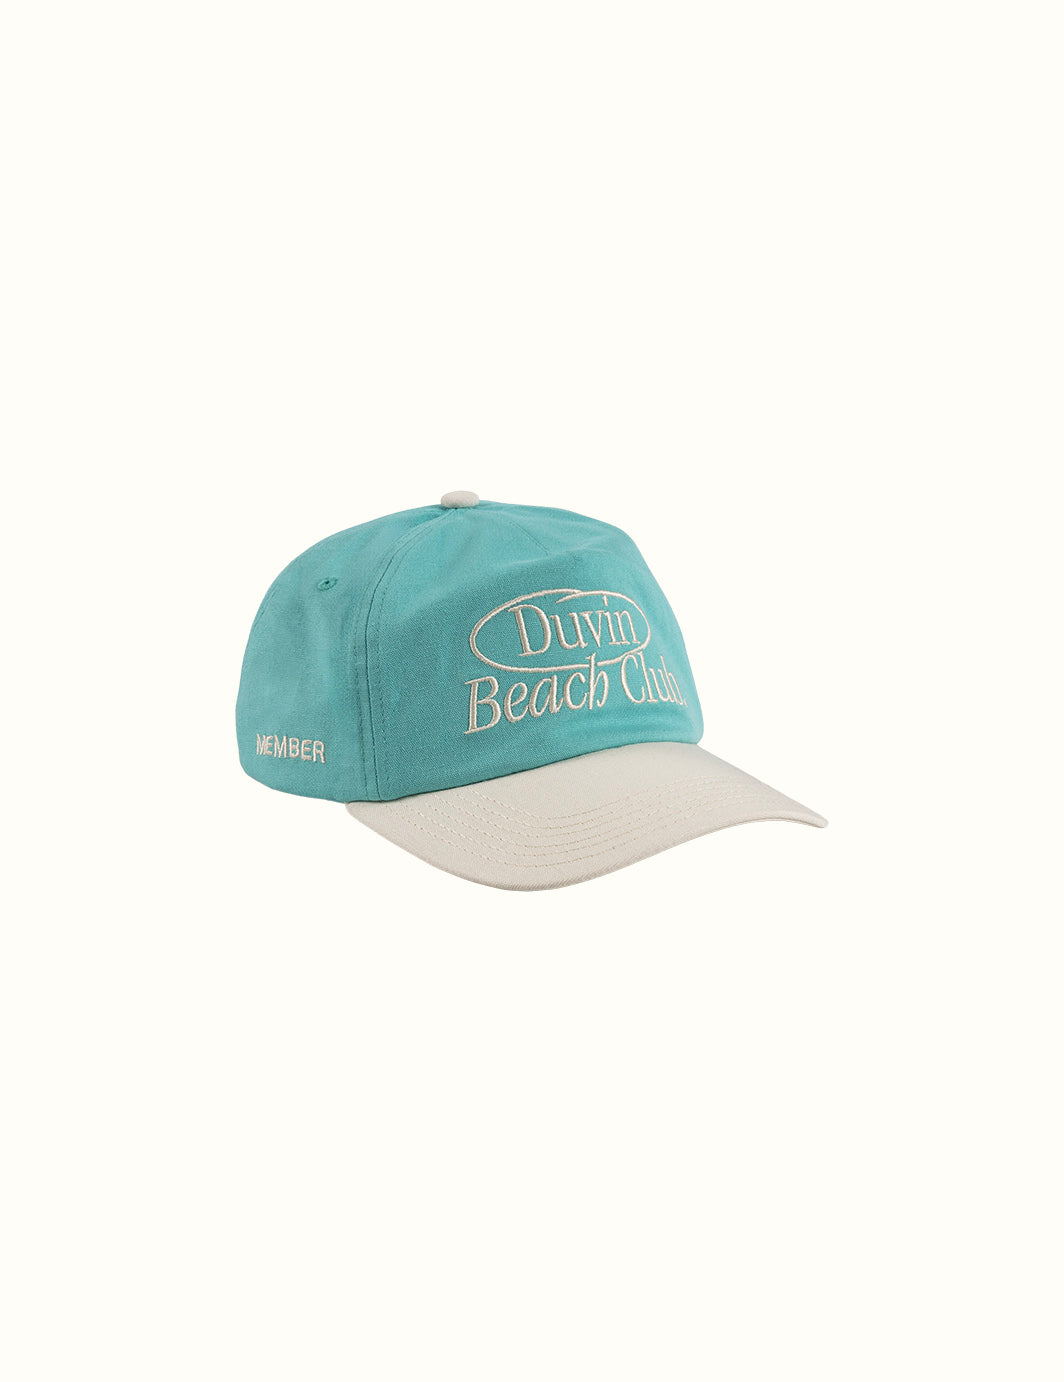 Members Only Hat - Teal